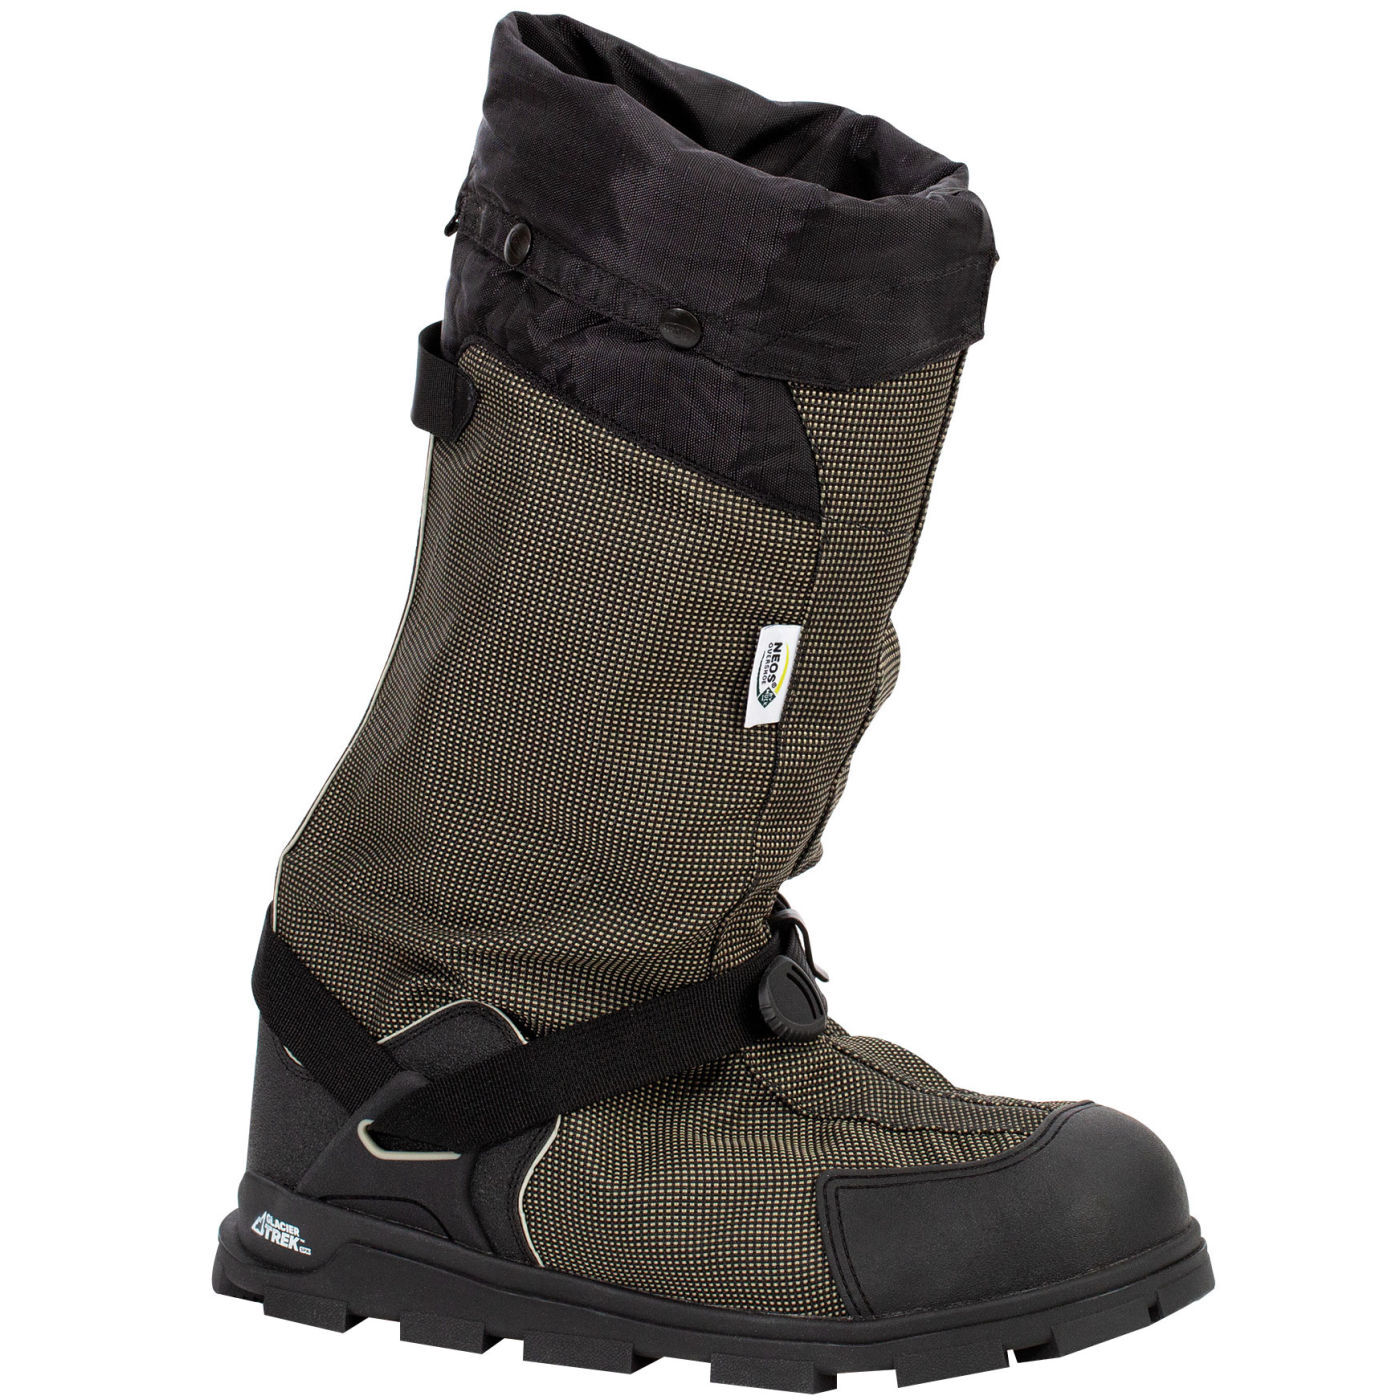 Overshoes from Farwest Line Specialties